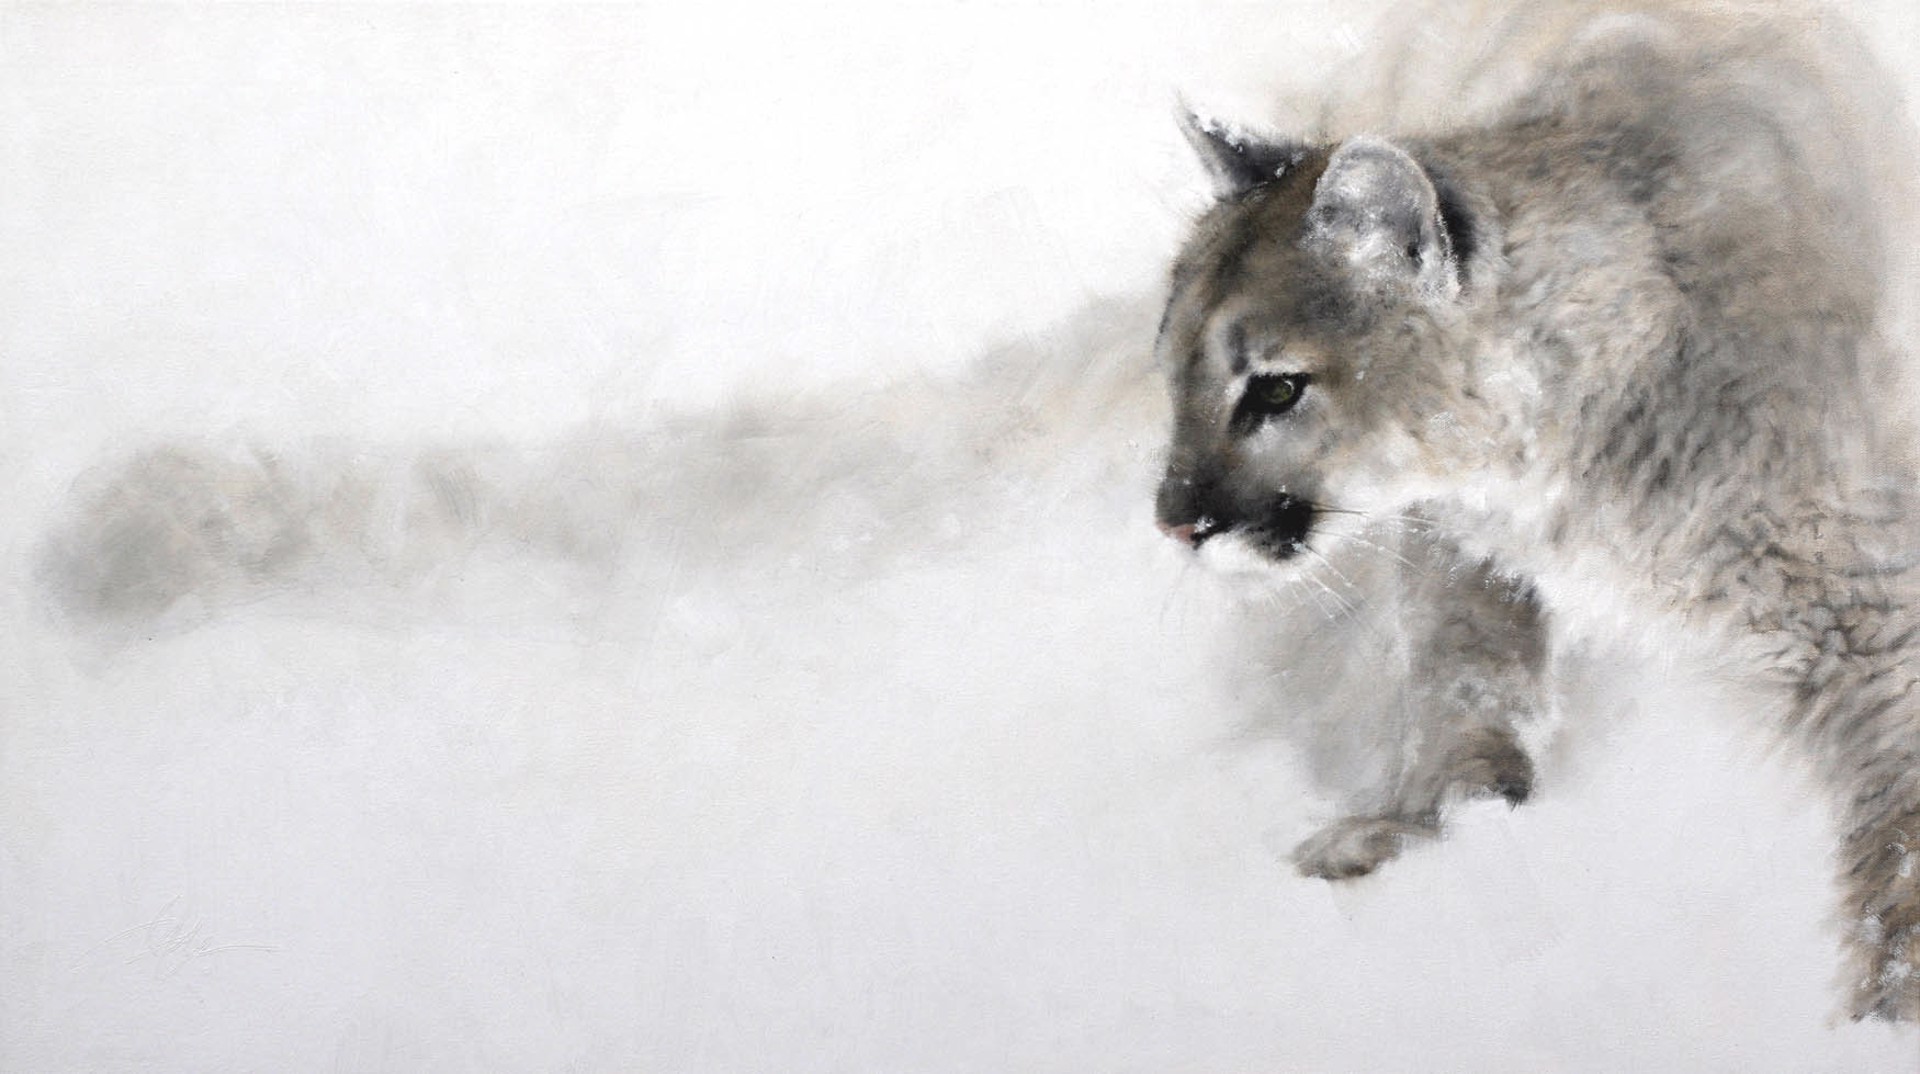 Original Oil Painting Featuring A Cougar Turning In Snow In Muted Color Palette